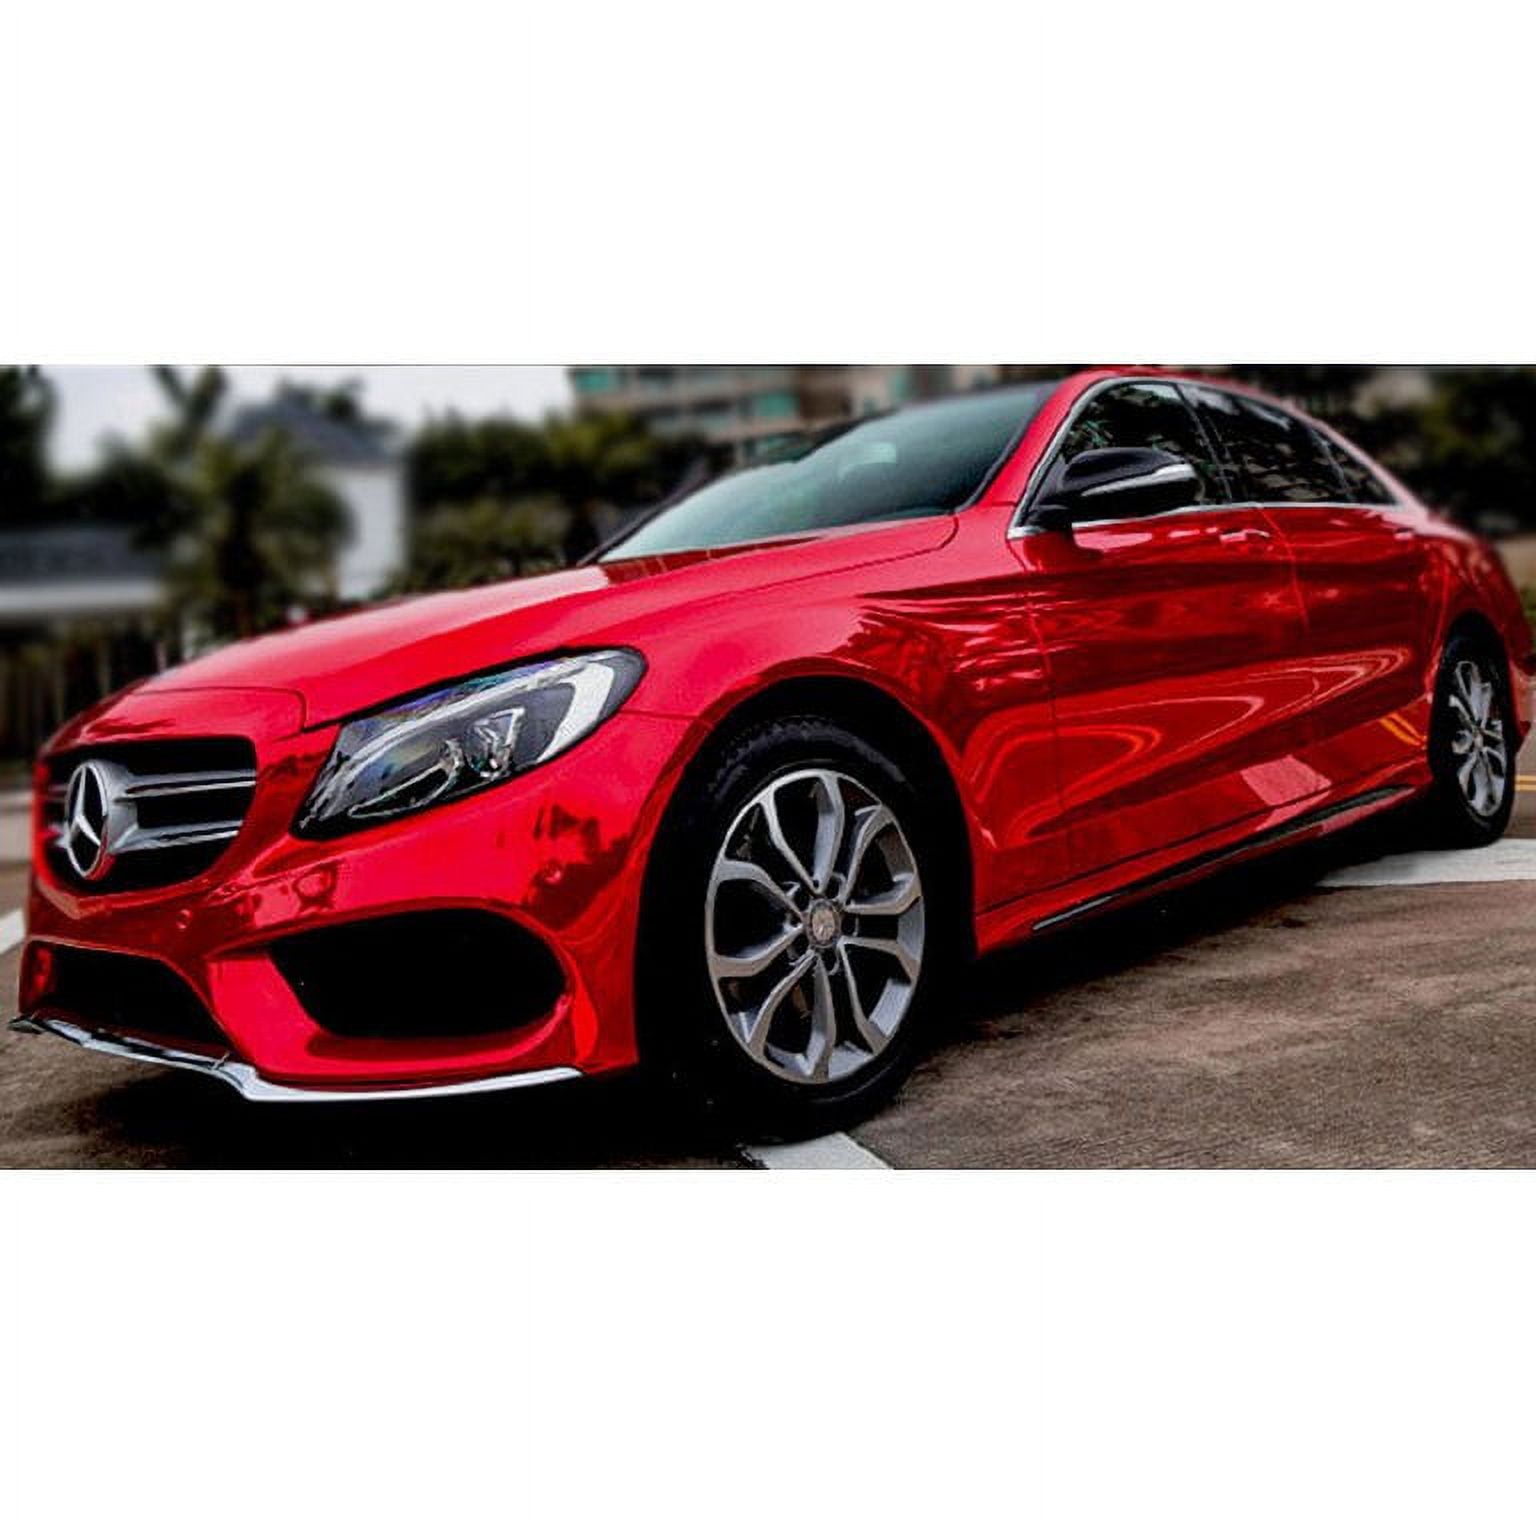 Premium Red Chrome Mirror Vinyl Wrap Film 1.52*20M Roll 5ft X 65ft For Car  Styling Air Bubble Free Stretchable And Durable From Top_carstyling,  $251.26